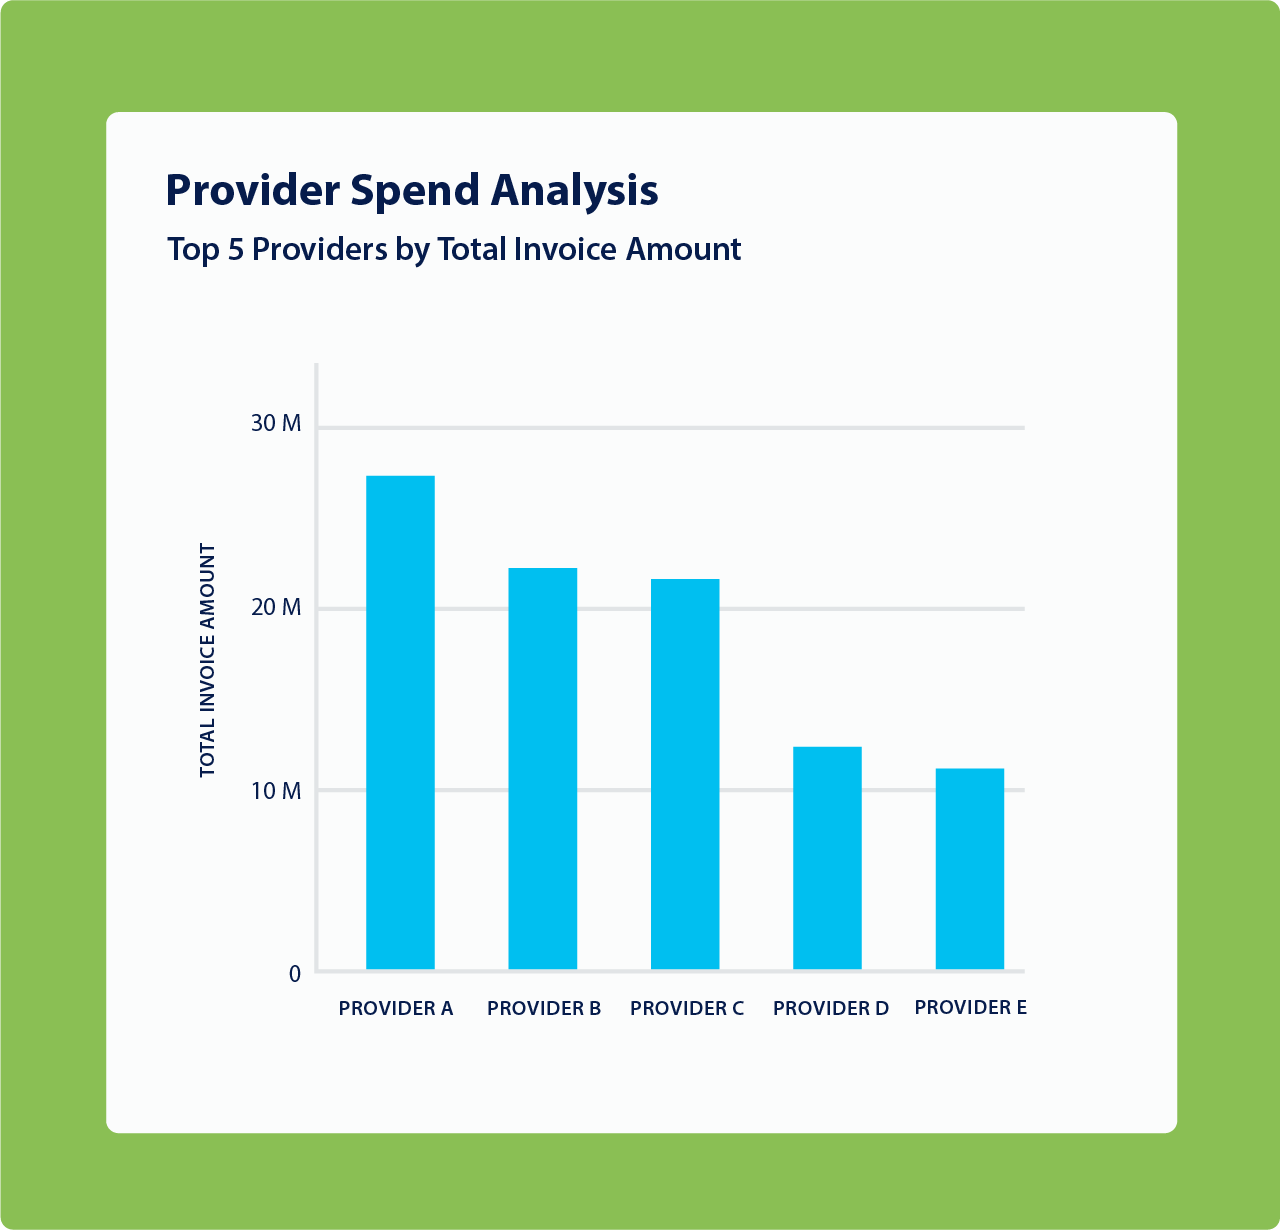 Provider Spend Analysis measured across each provider for total invoice amounts